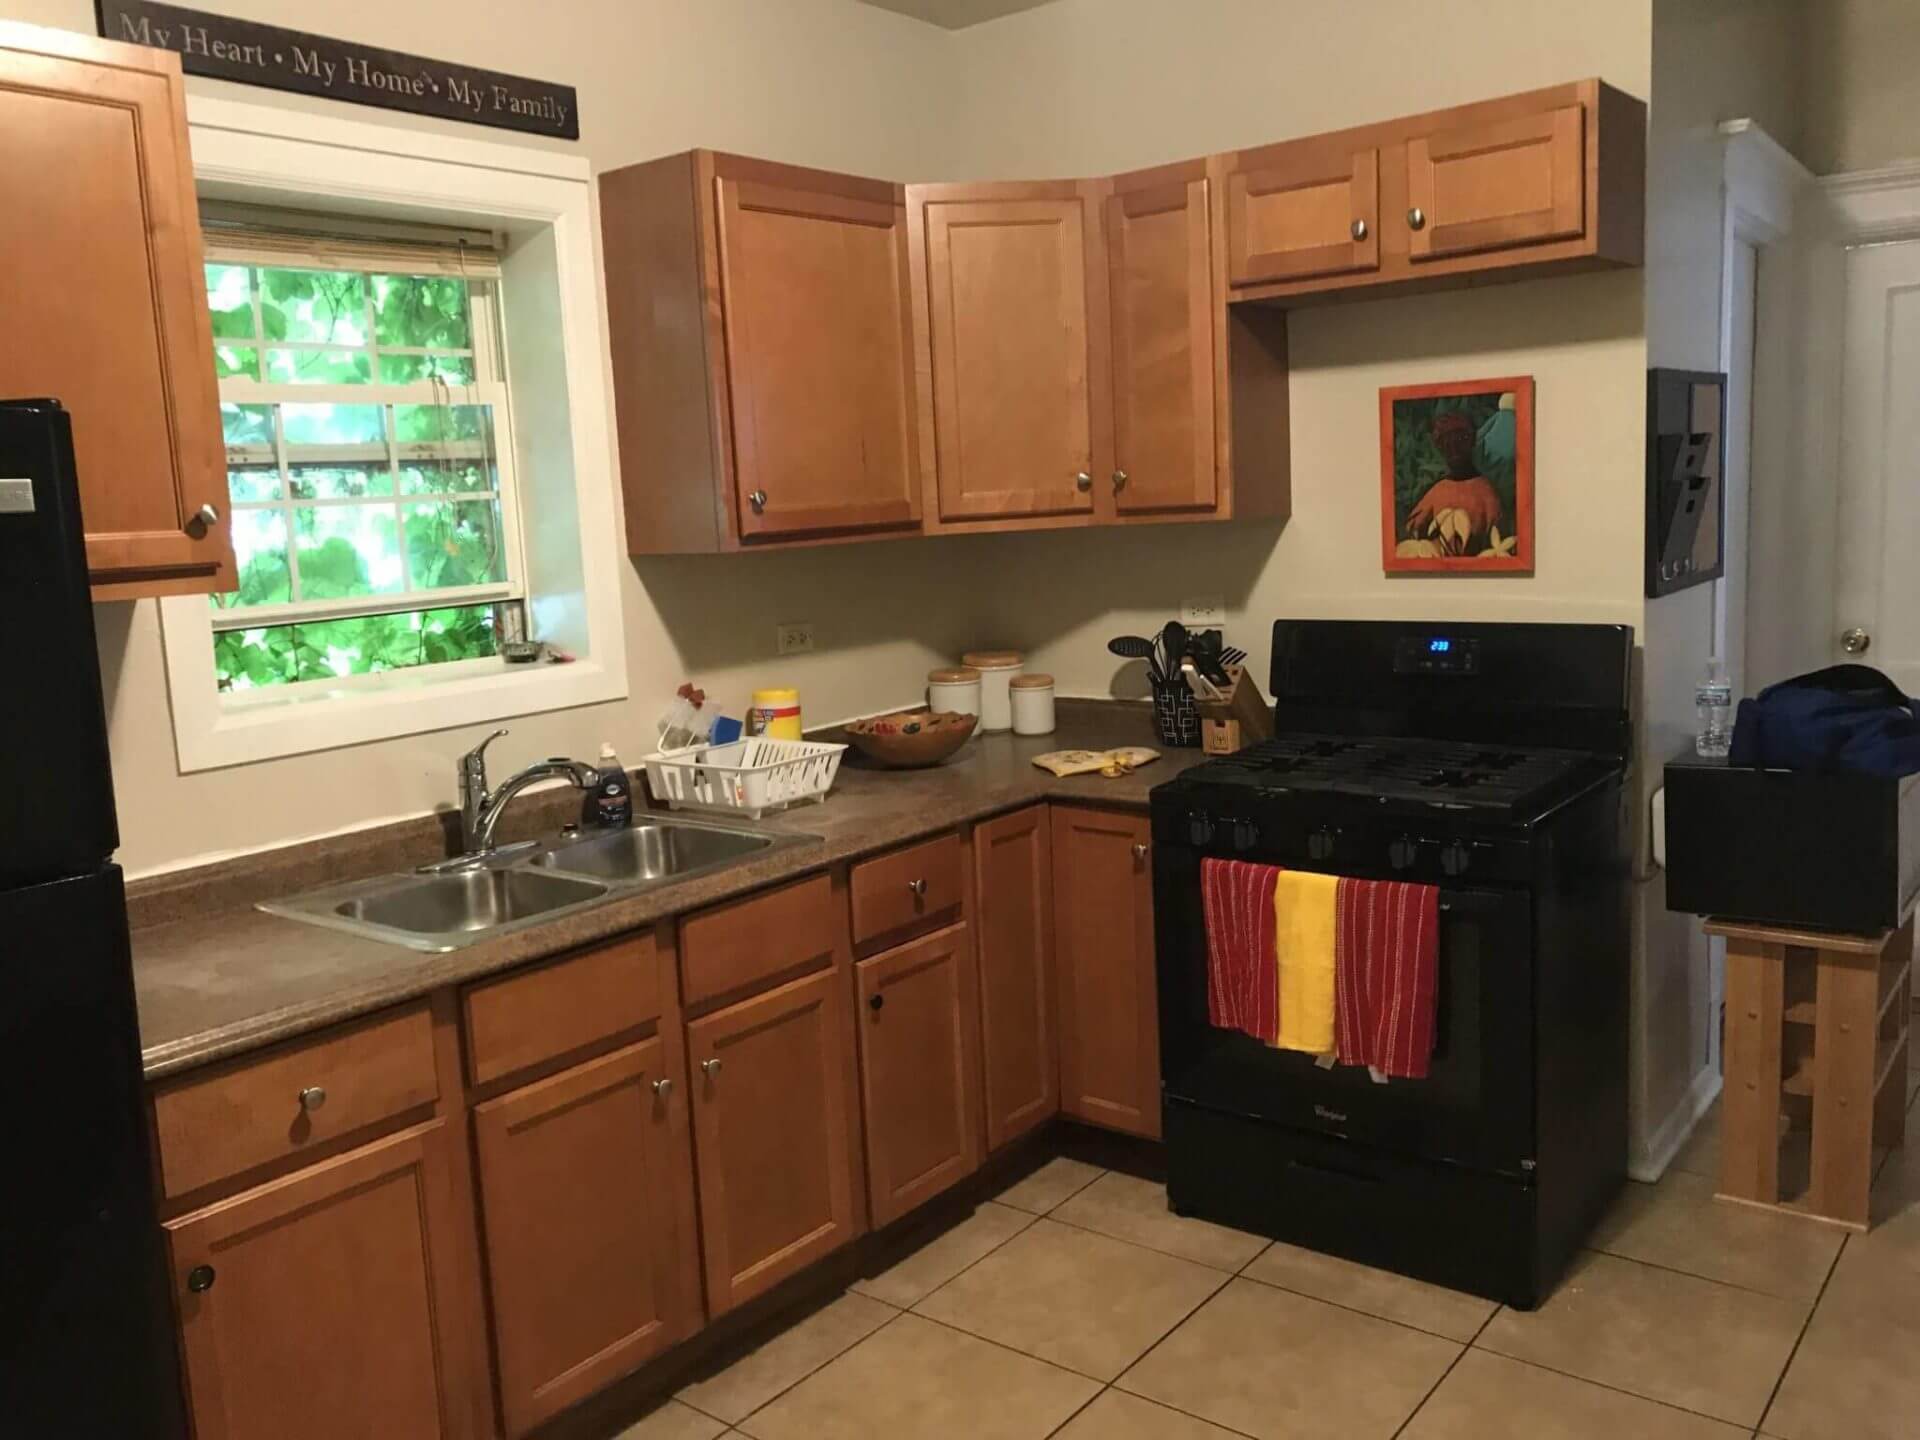 Kitchen set up in new home